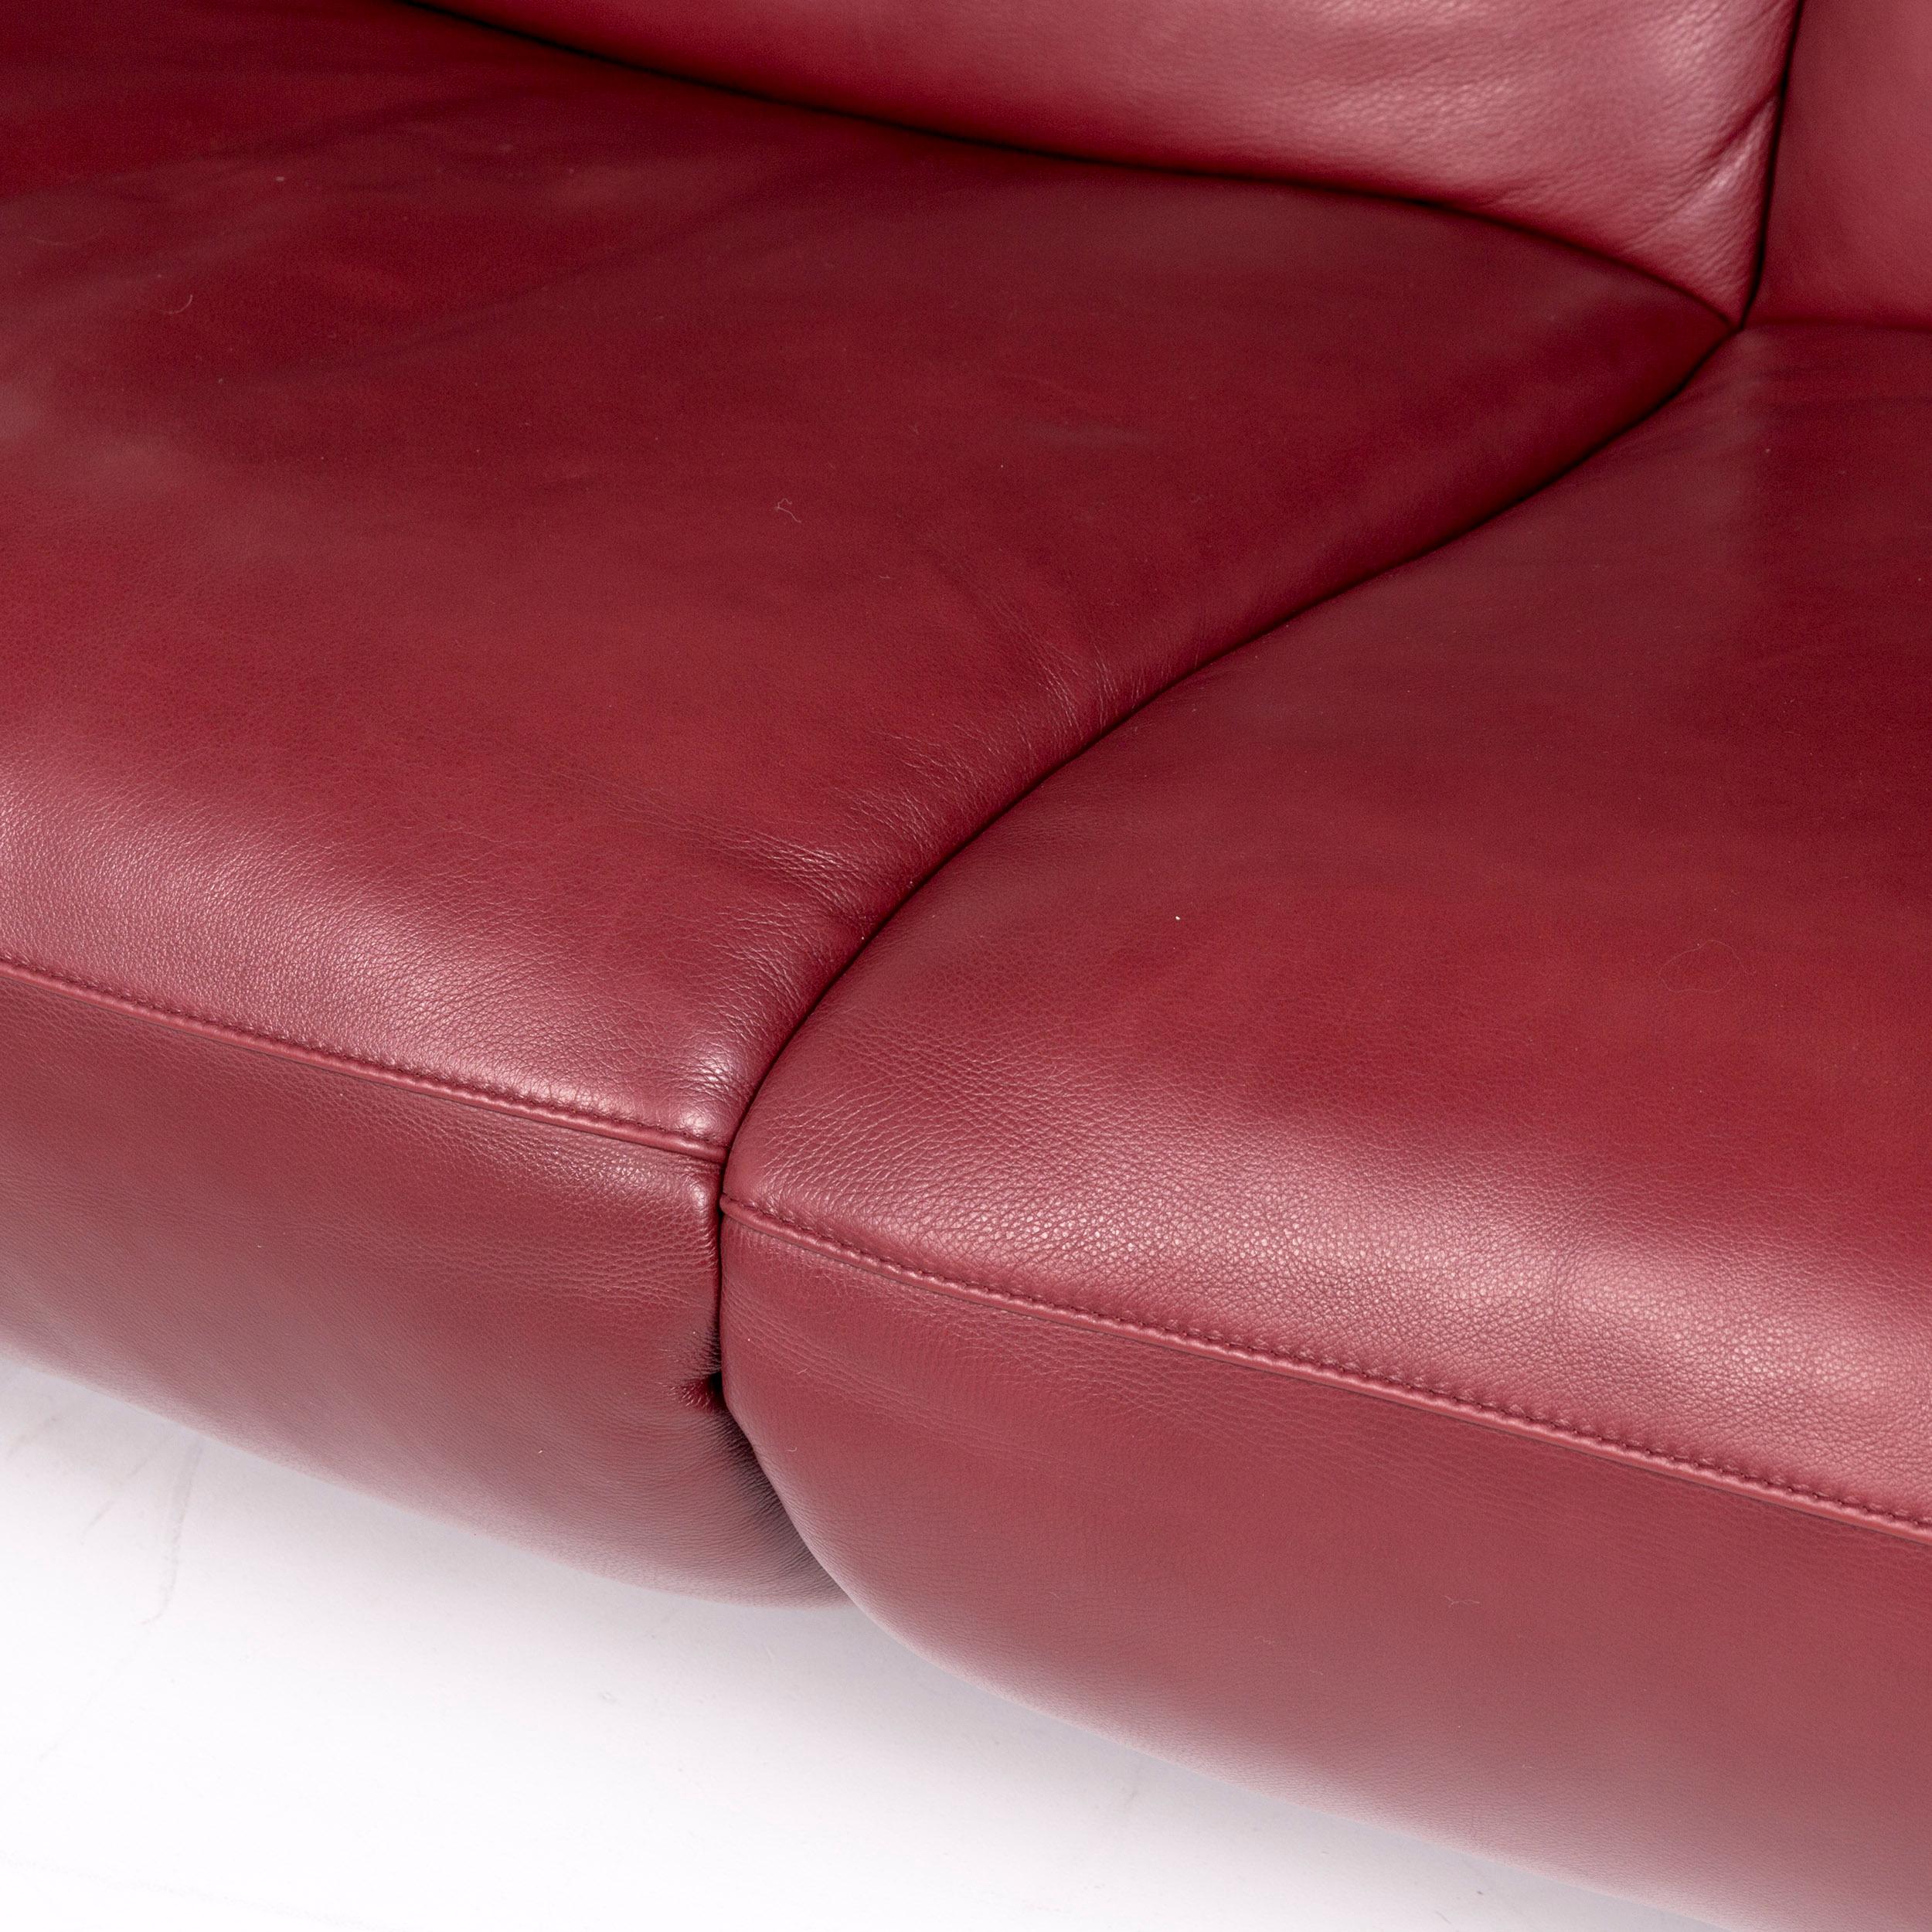 German Koinor Elena Leather Corner Sofa Red Sofa Function Relaxation Couch For Sale